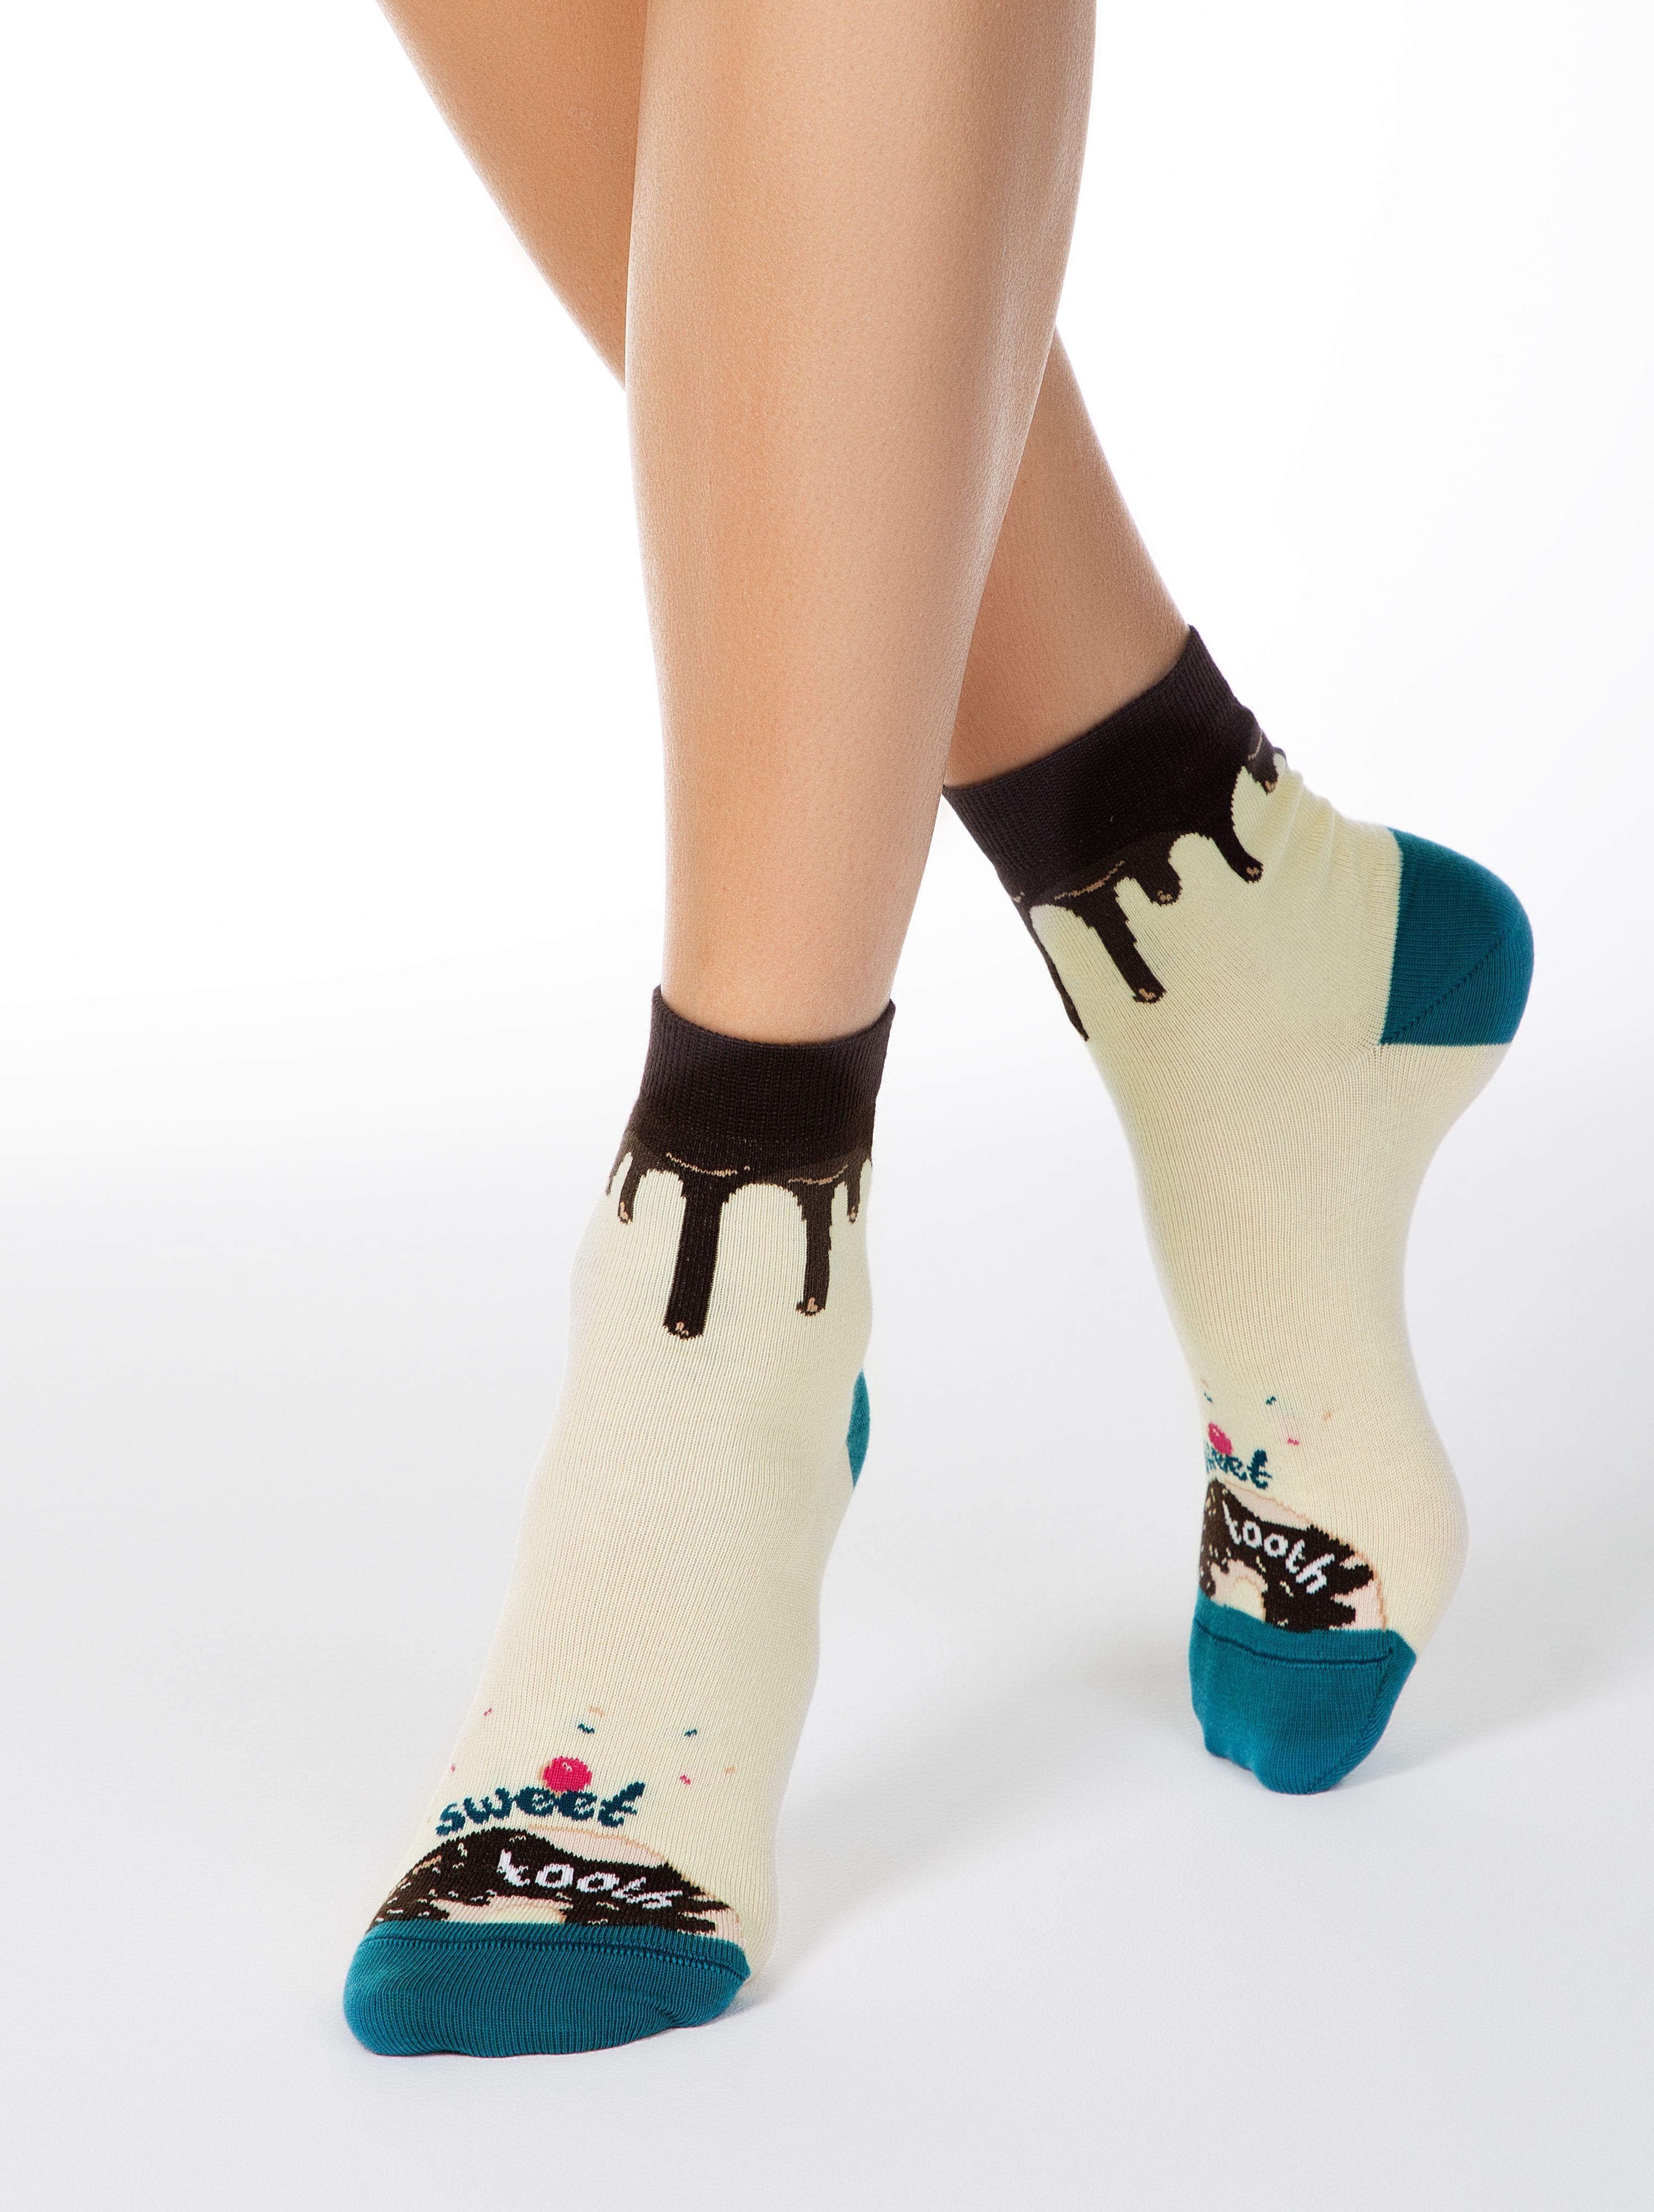 cool funny casual patterned Socks with an interesting design by Conte Elegant